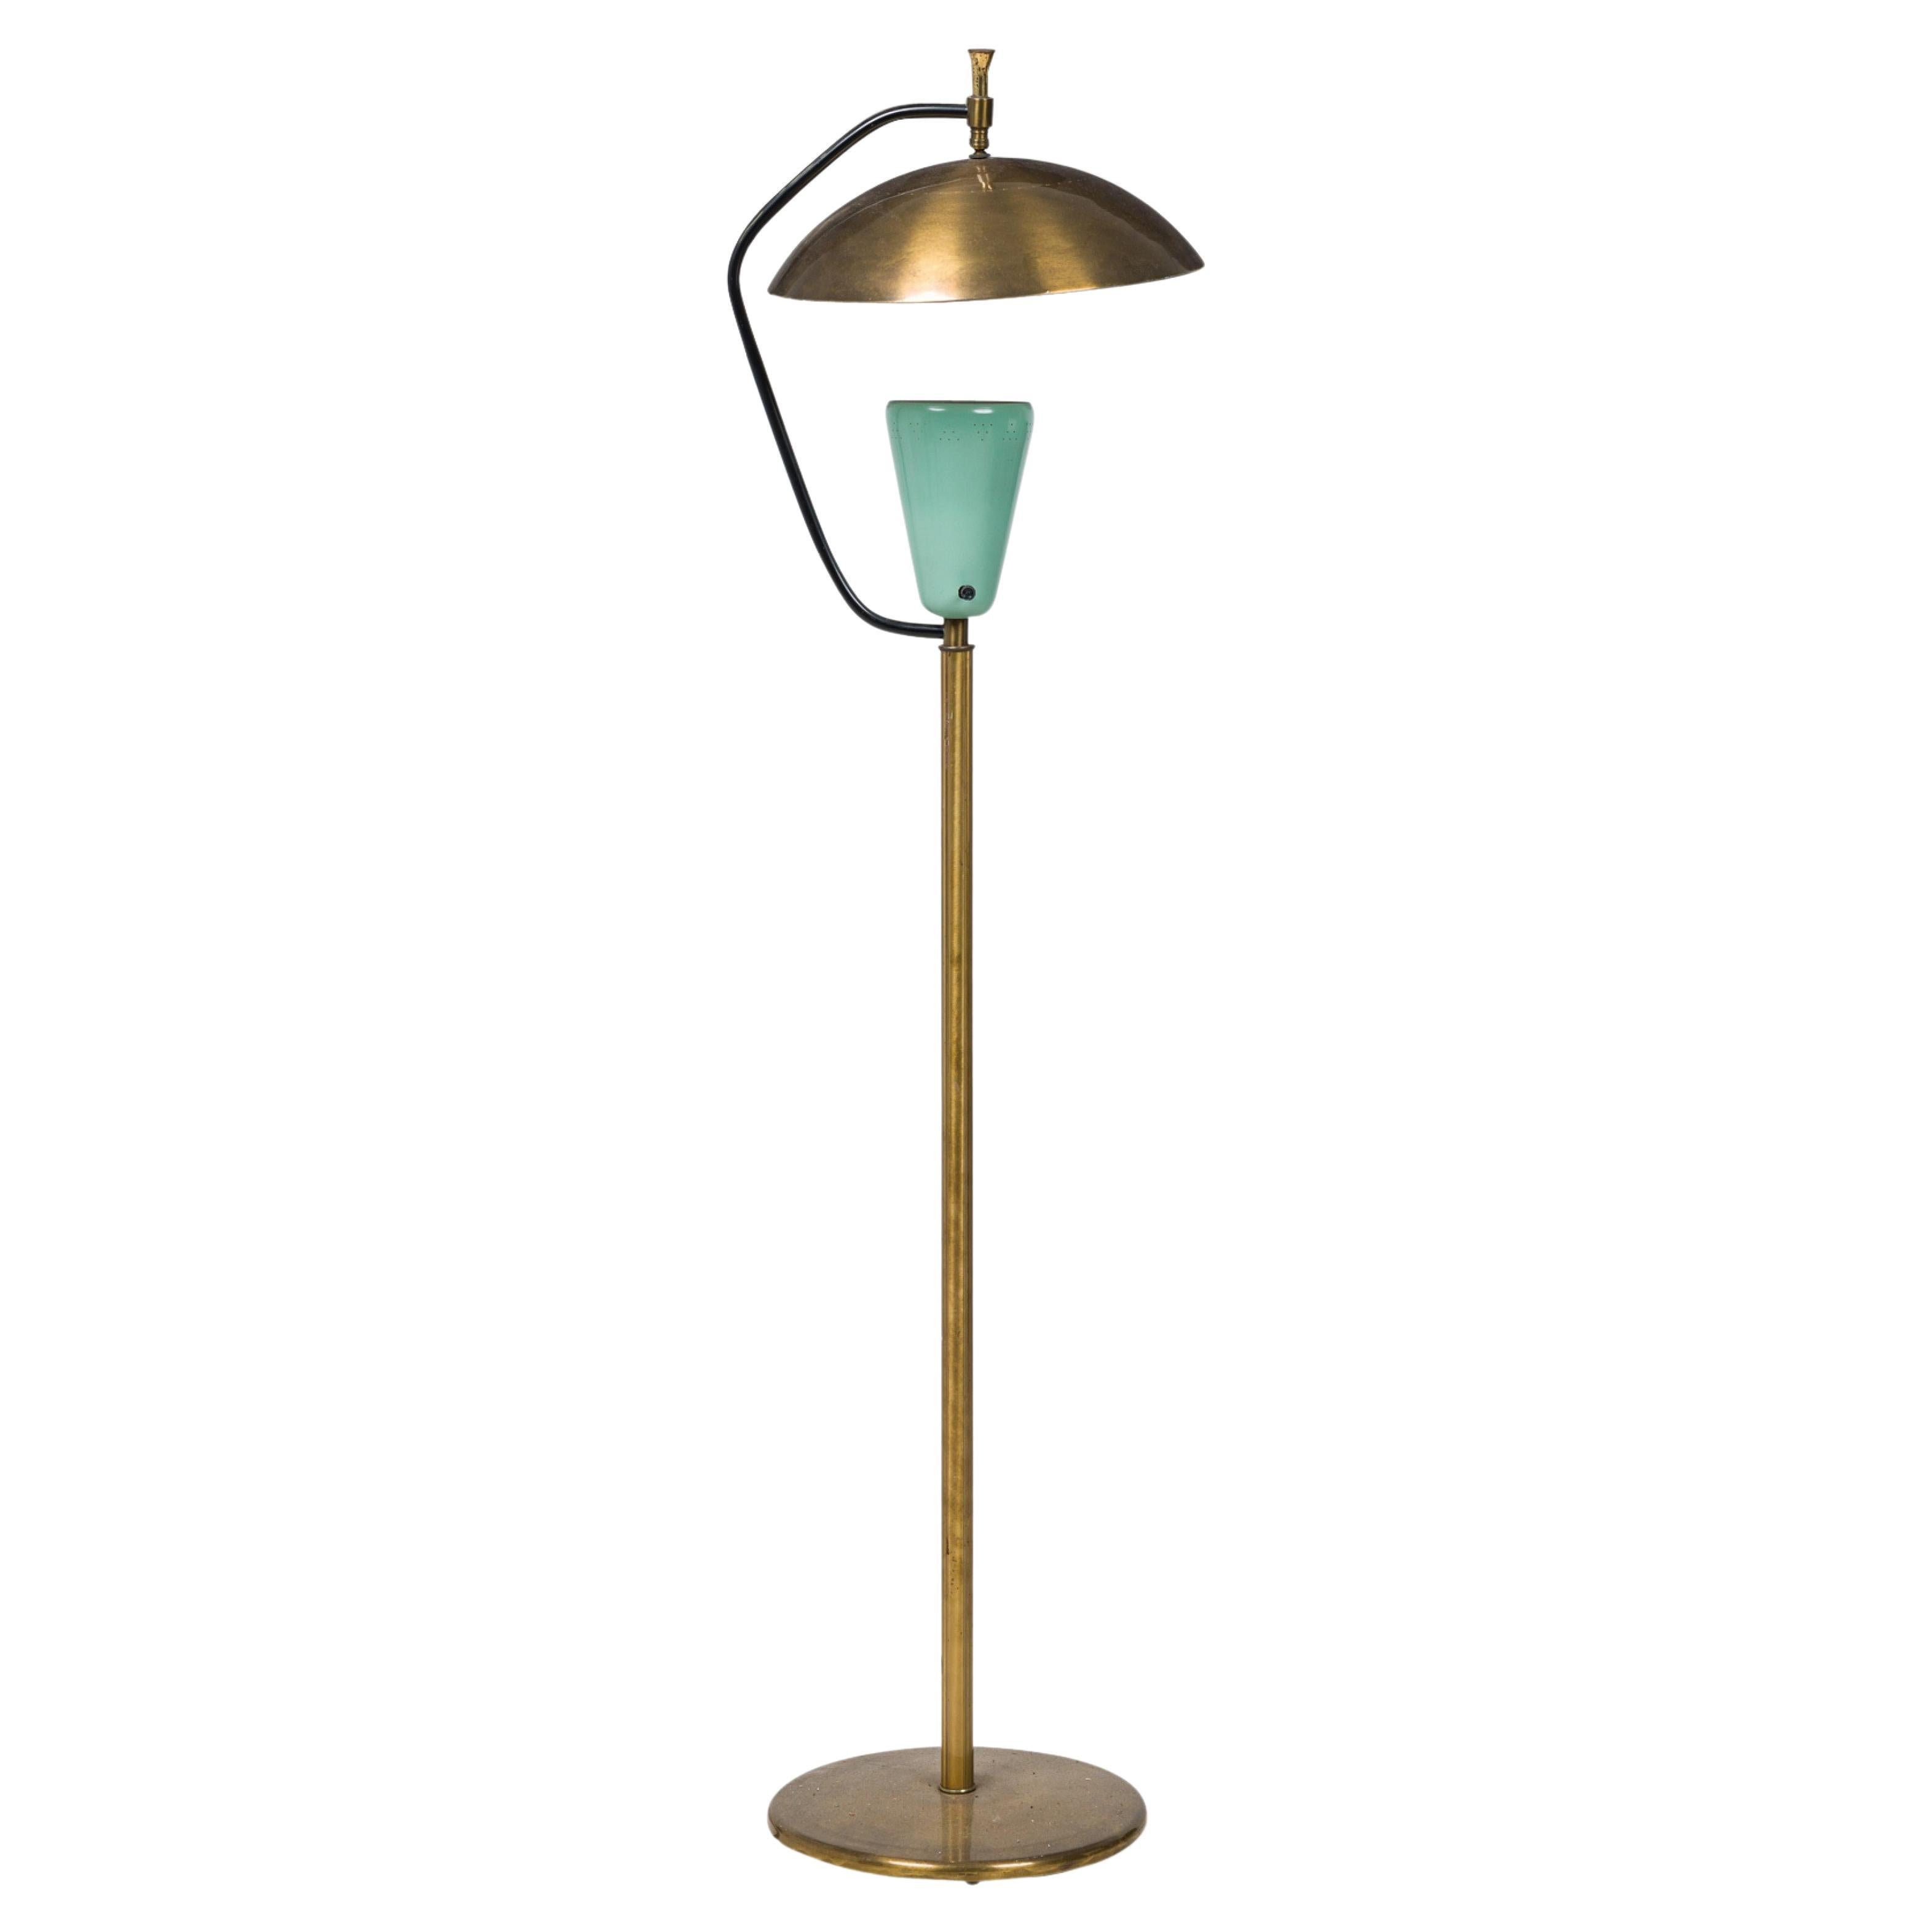 Pierre Guariche Midcentury French Brass and Green Enamel Floor Lamp